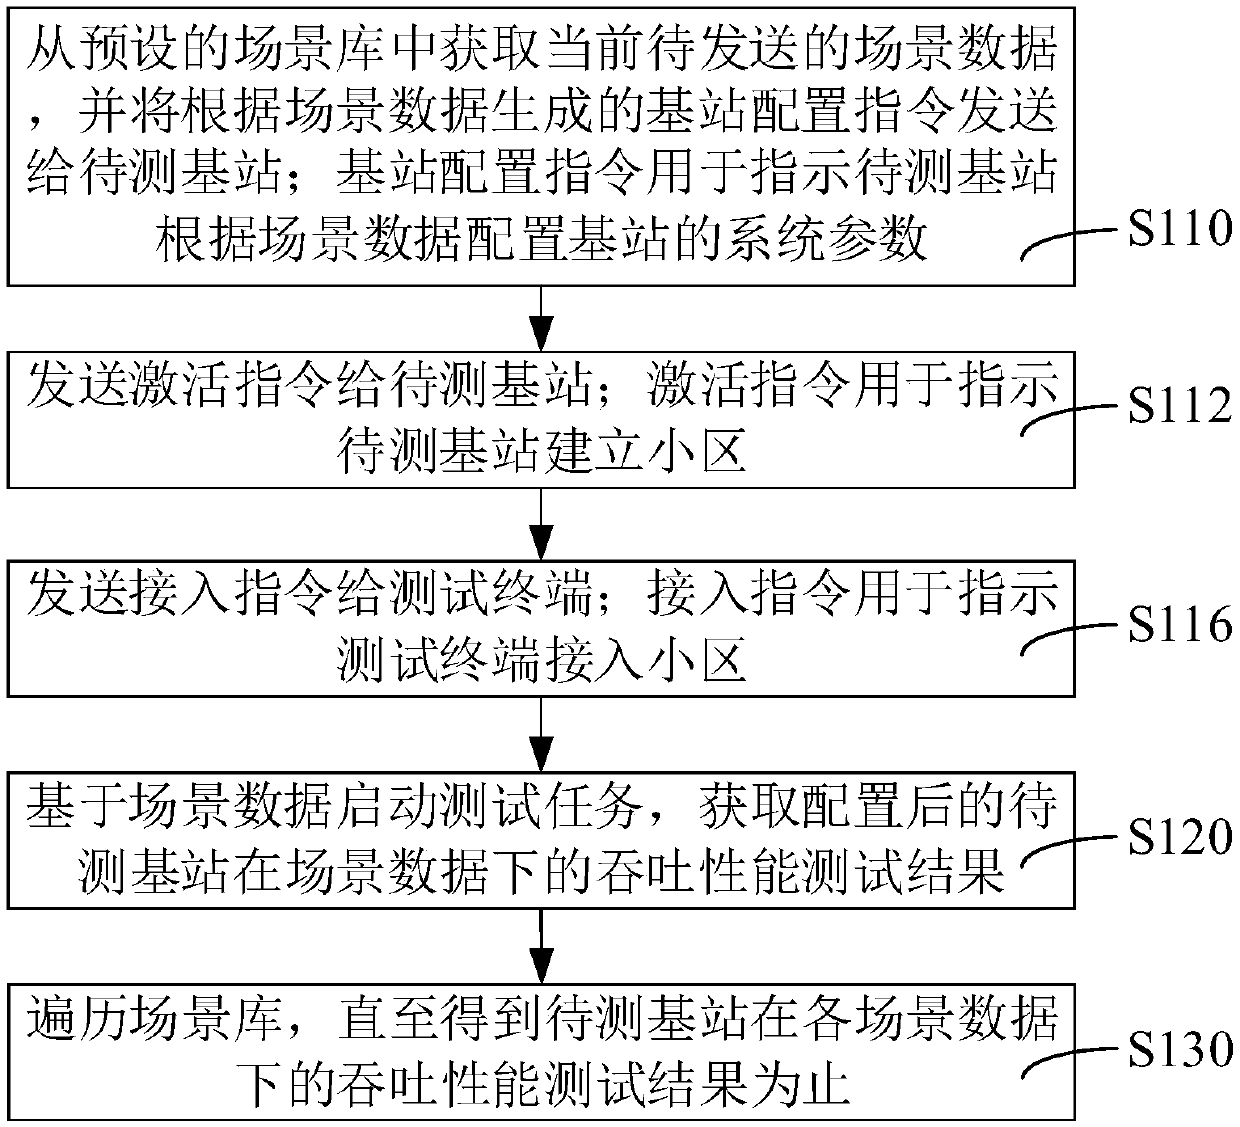 Base station air interface throughput performance test method, device and system